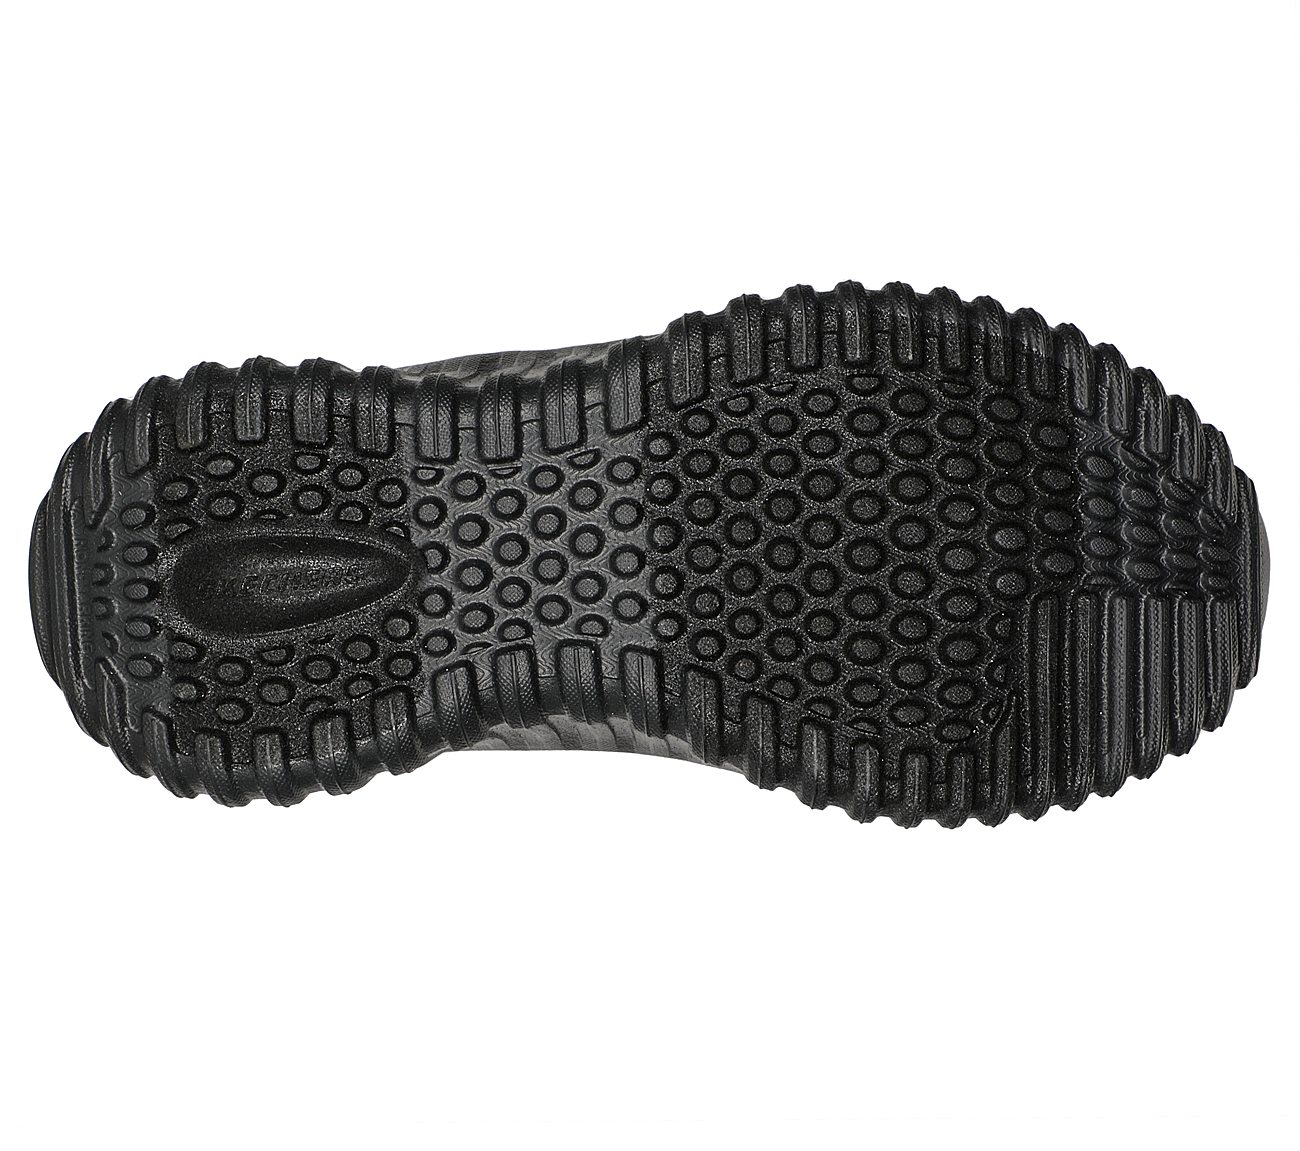 DEPTH CHARGE 2.0-DOUBLE POINT, BLACK/MULTI Footwear Bottom View